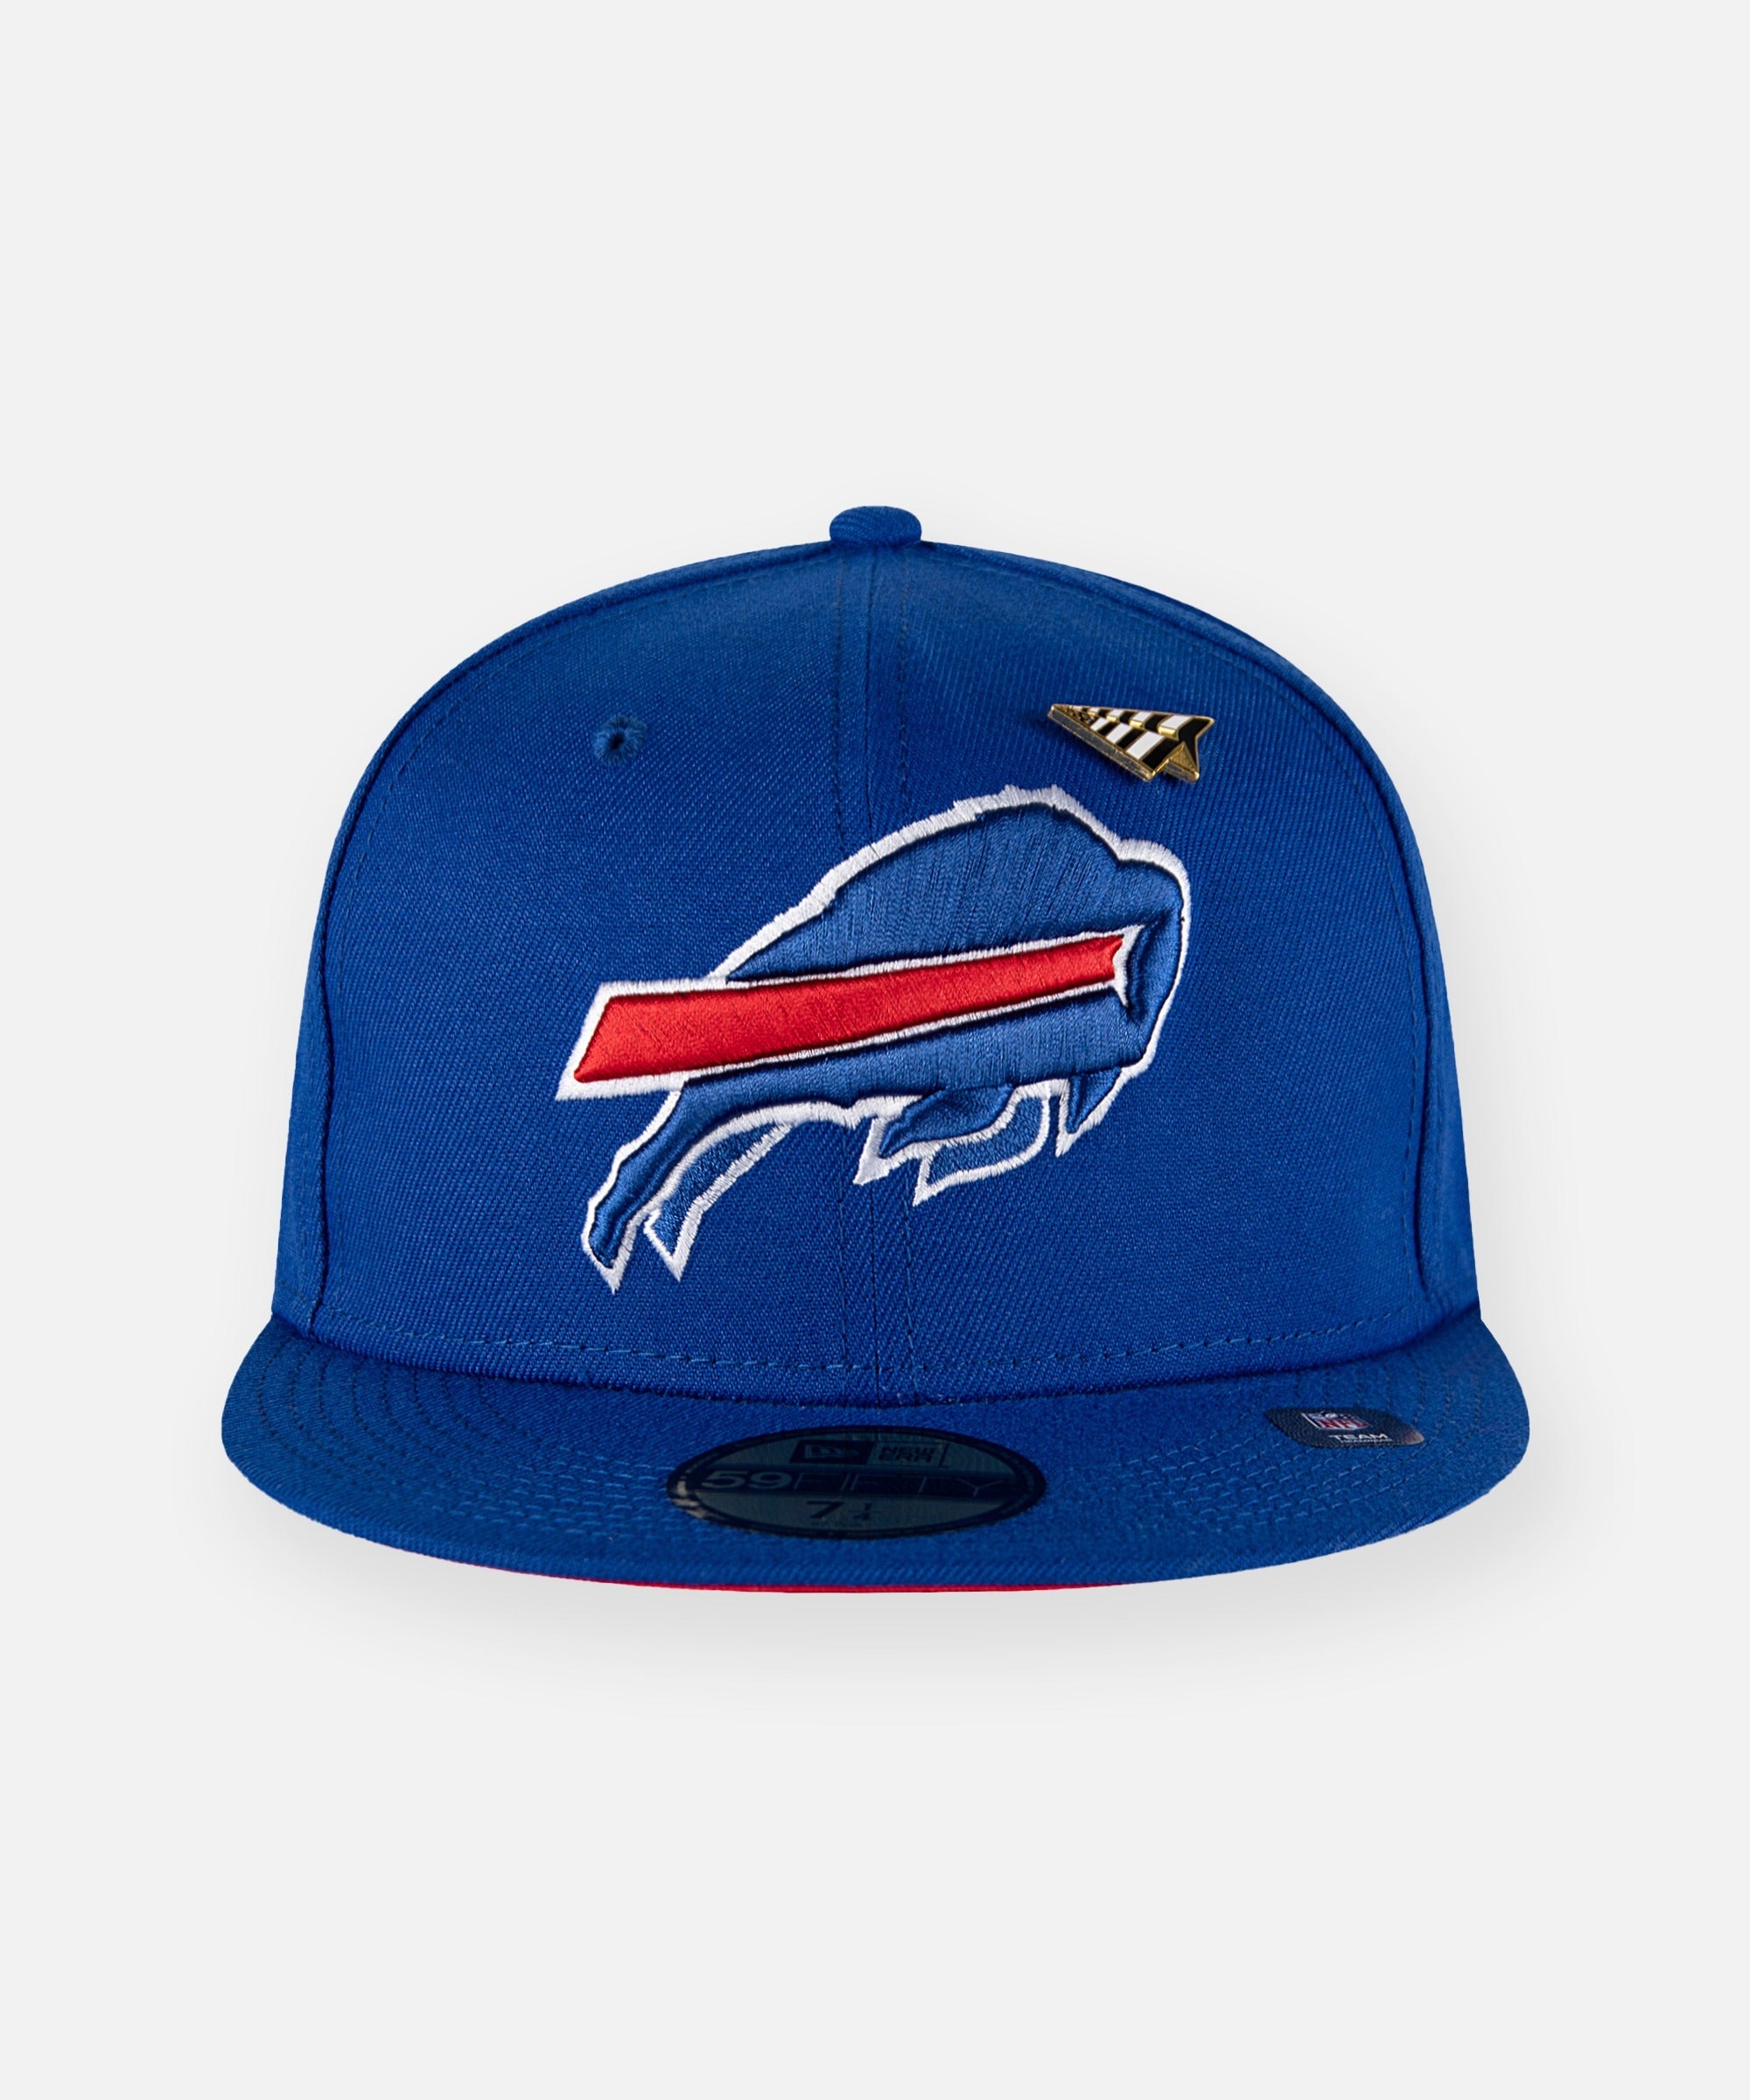 Paper Planes x Buffalo Bills Team Color 59Fifty Fitted Hat